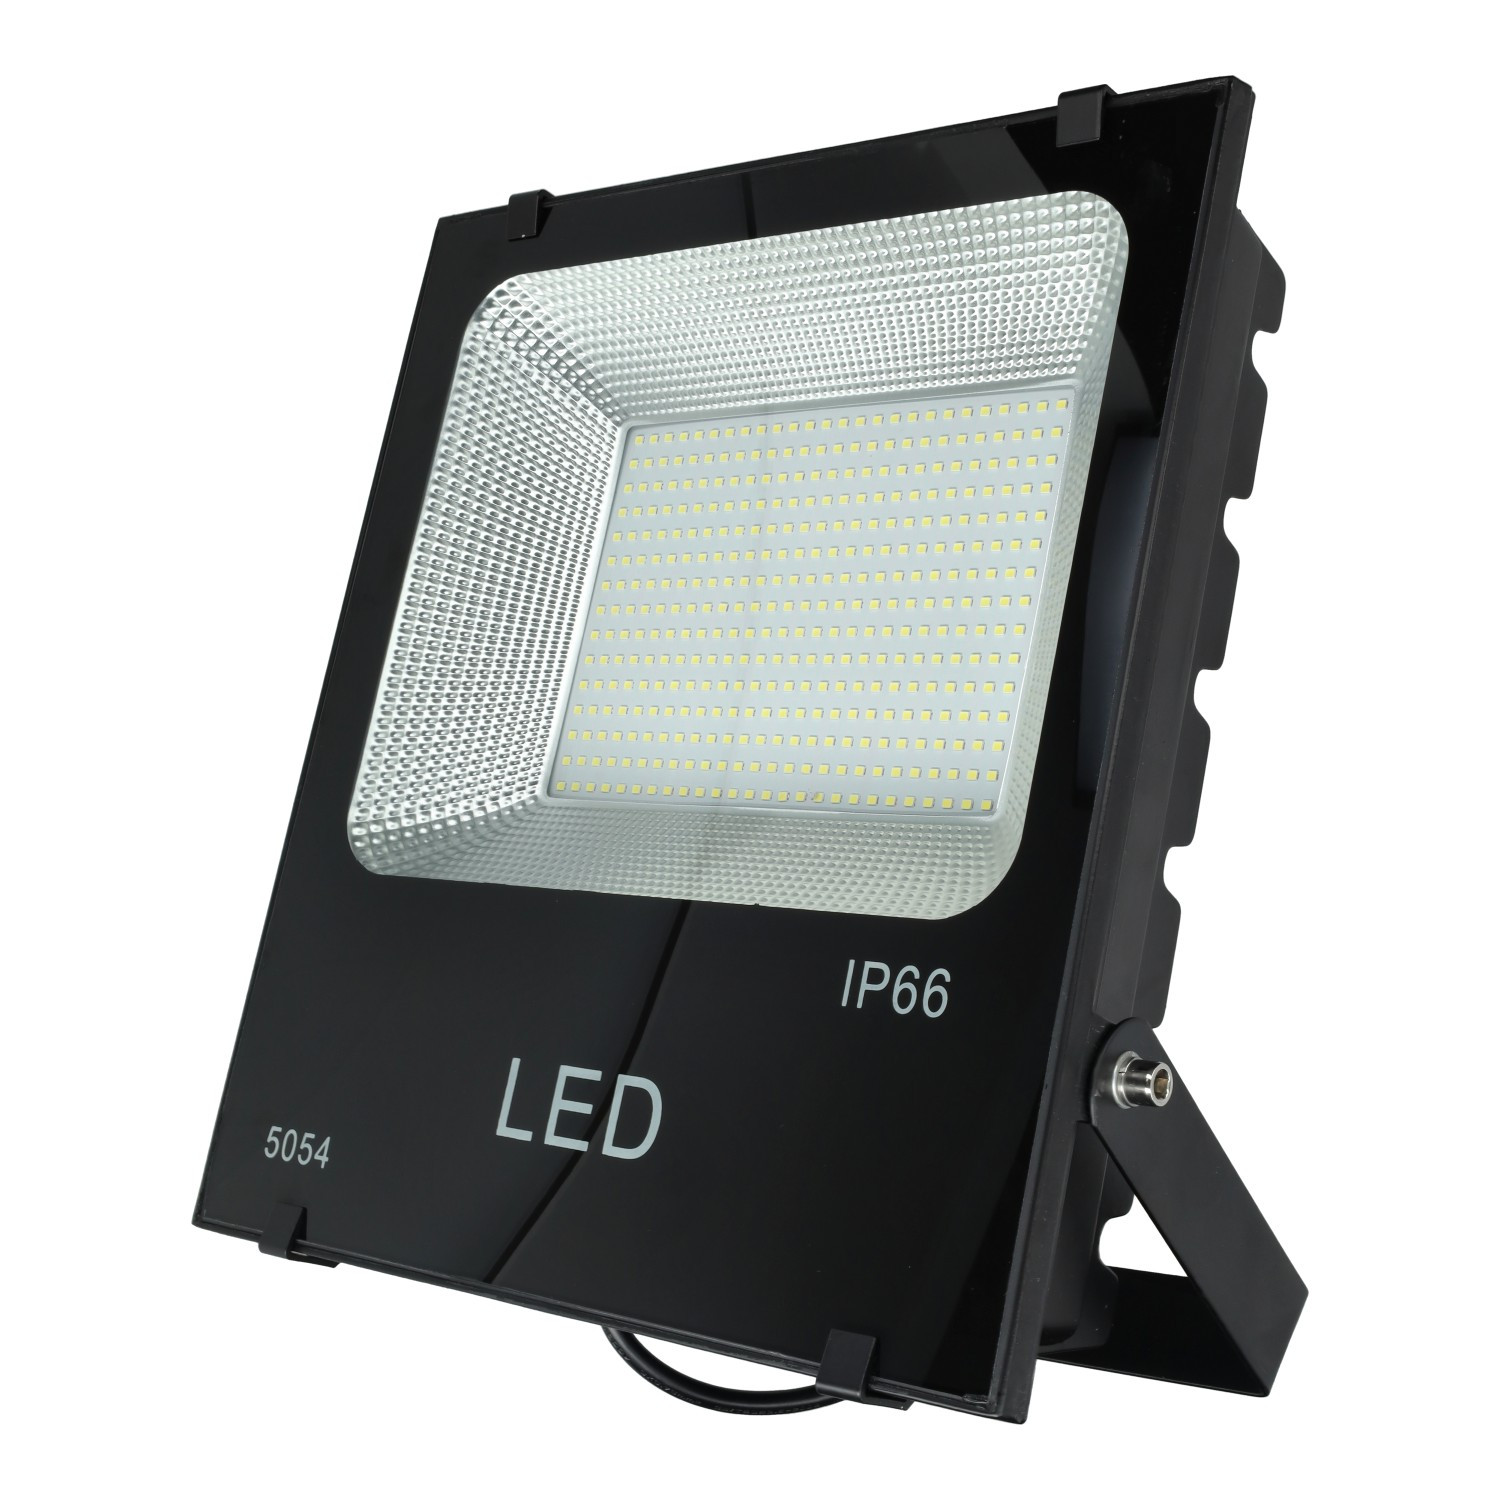 Proyector led 150W plano SMD